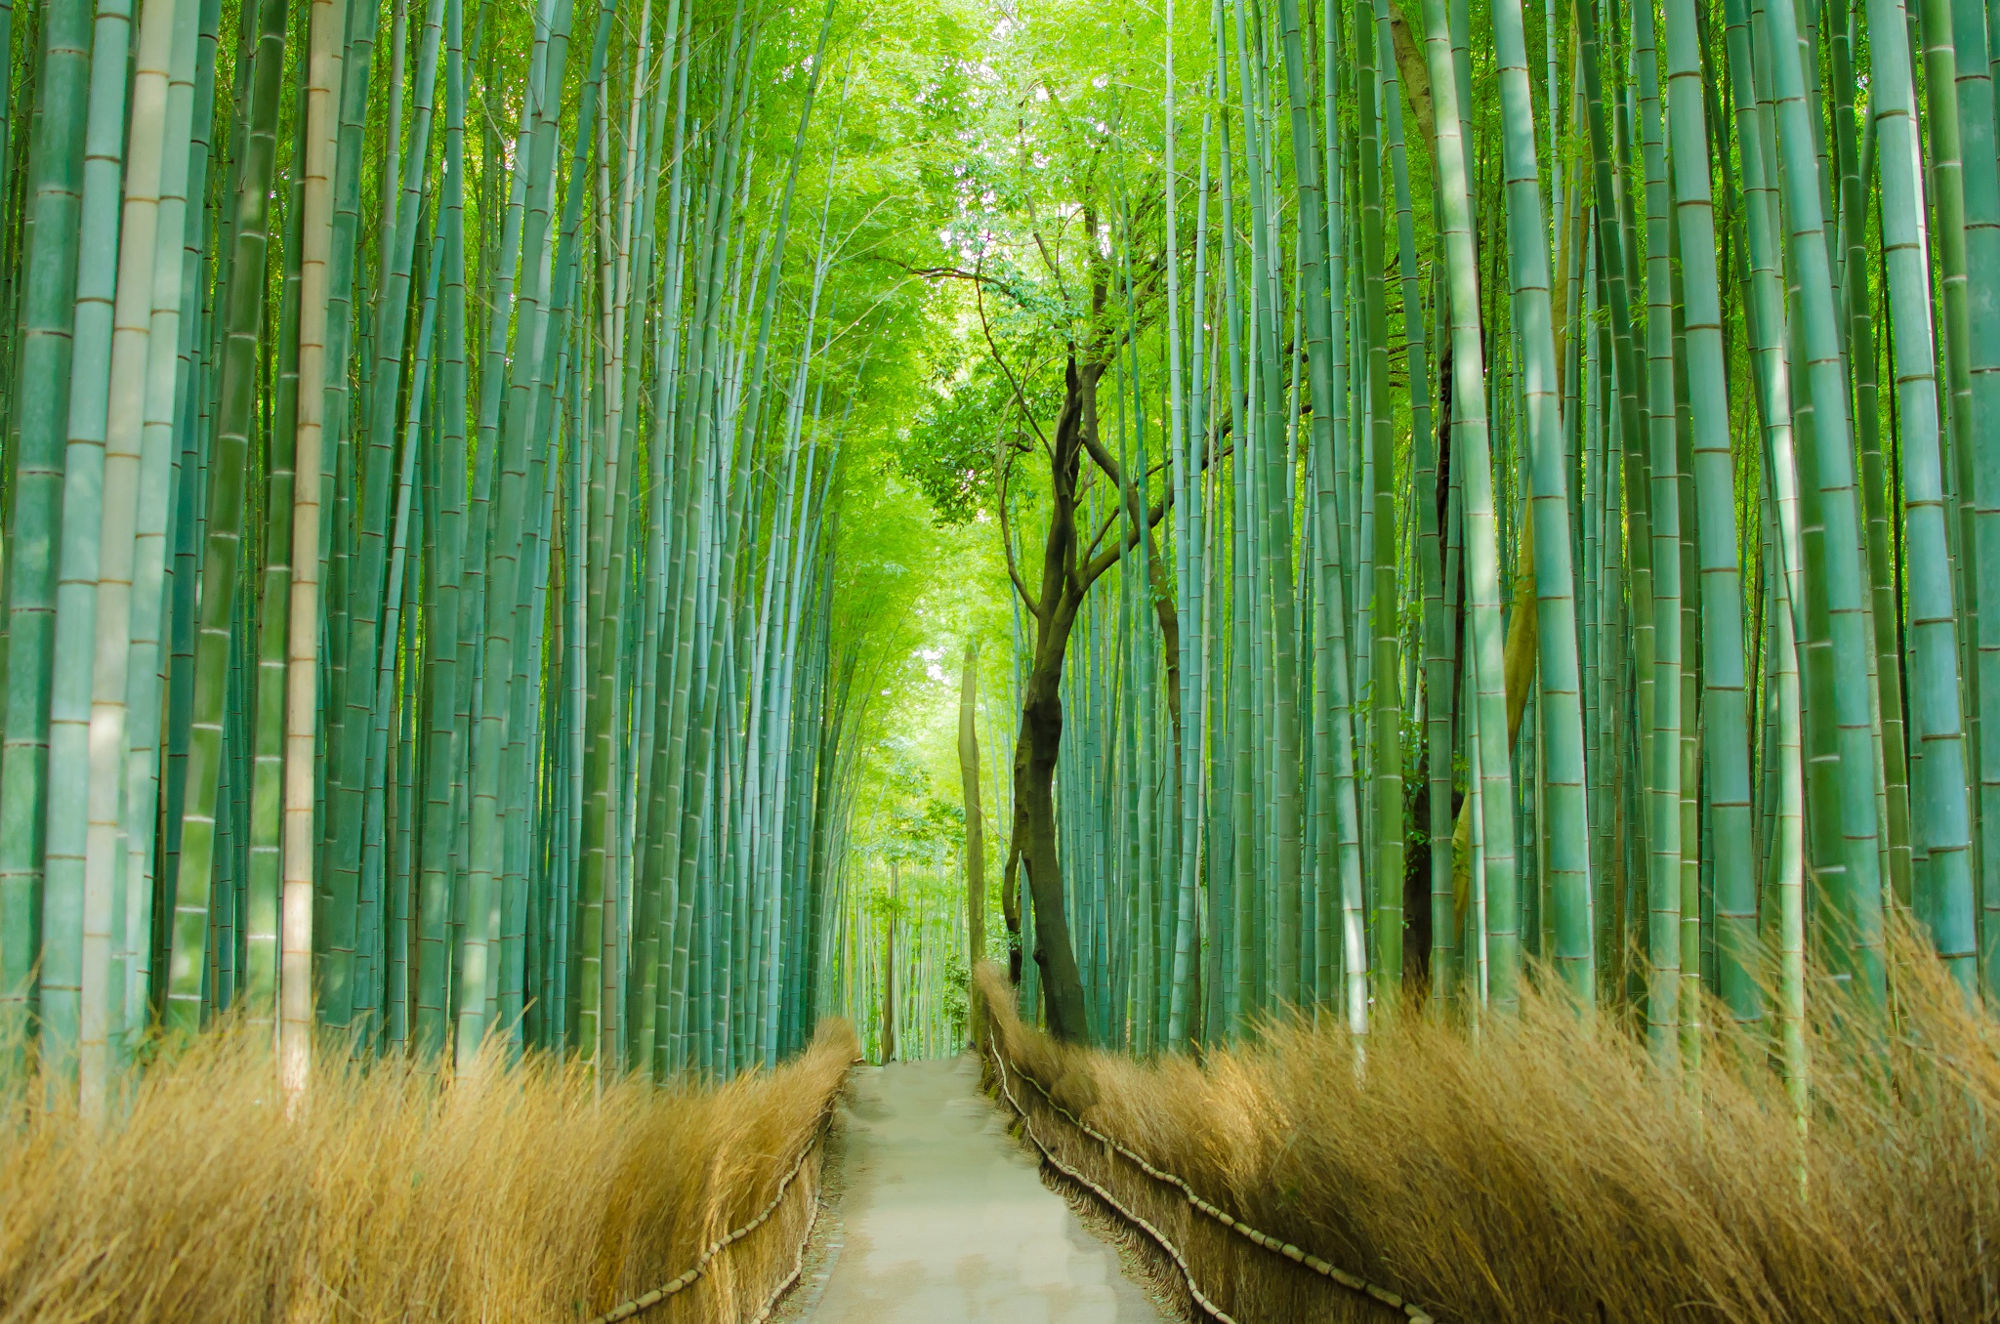 General 2000x1324 nature trees path bamboo green yellow grass